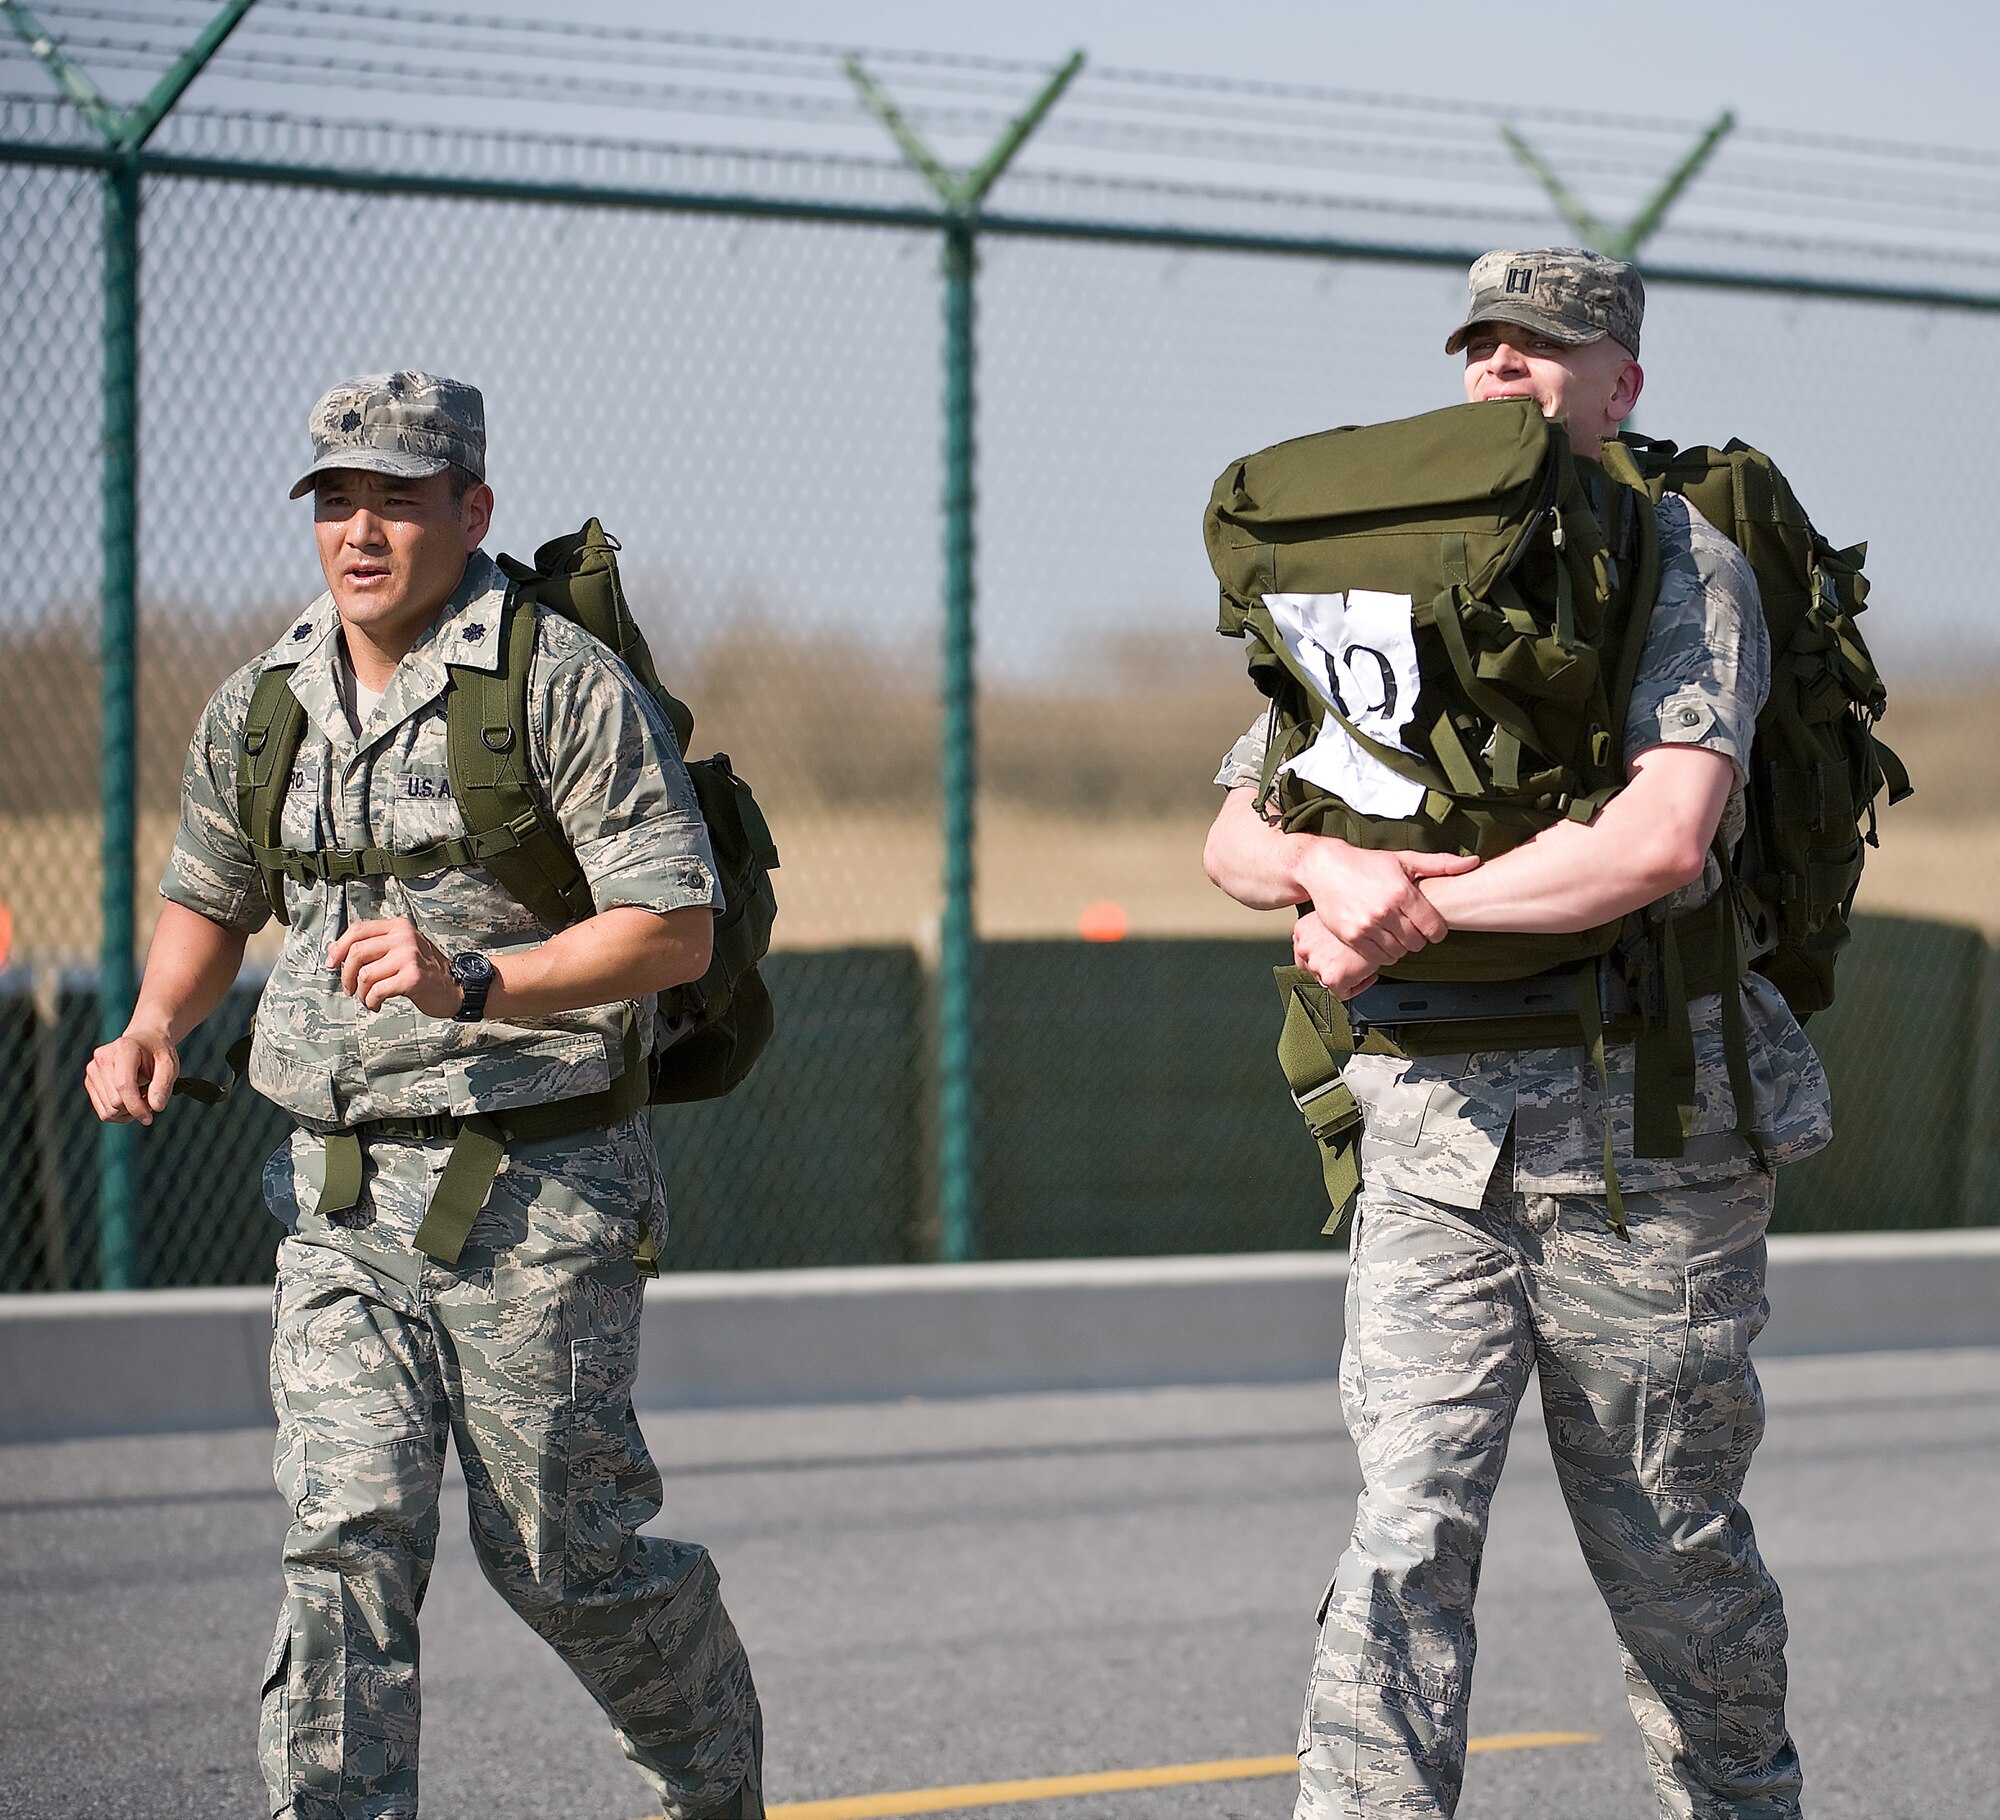 (Left to right) Lt. Col. David Kumashiro, 436th Operations Support Squadron commander, runs alongside Capt. Matt Born, 436th OSS, who carries his 30-pound rucksack and an additional 30-pound rucksack belonging to a teammate. Participants ran 10 kilometers with rucksacks during the 10th Annual Ruck March Feb. 21. (U.S. Air Force photo/ Roland Balik)